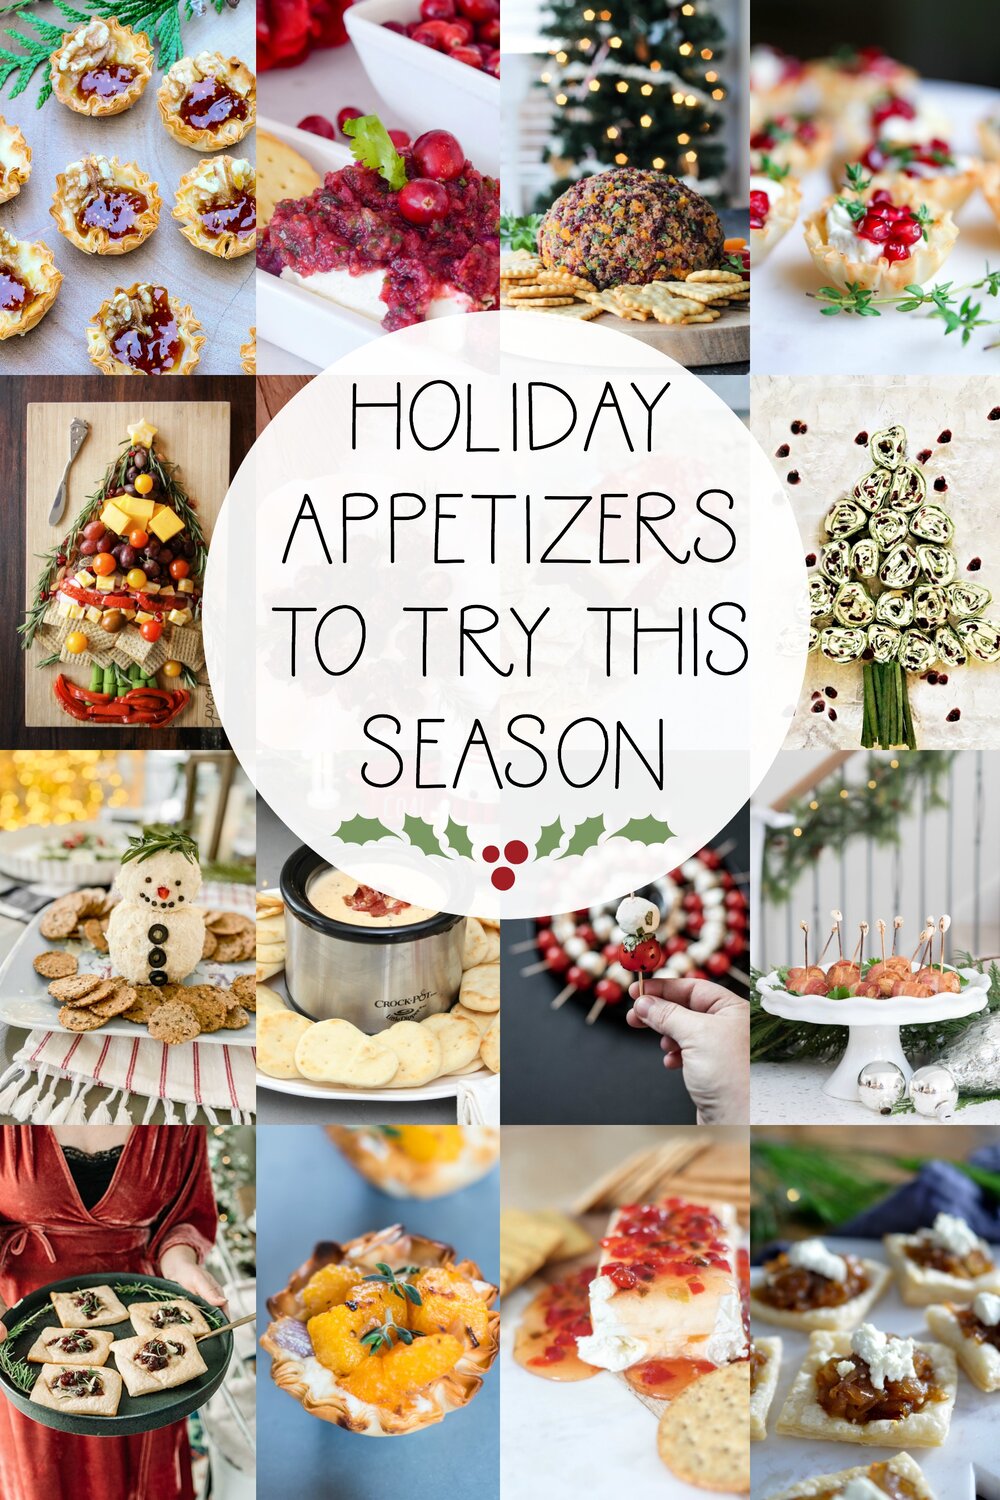 Holiday Appetizers to try this season.jpg